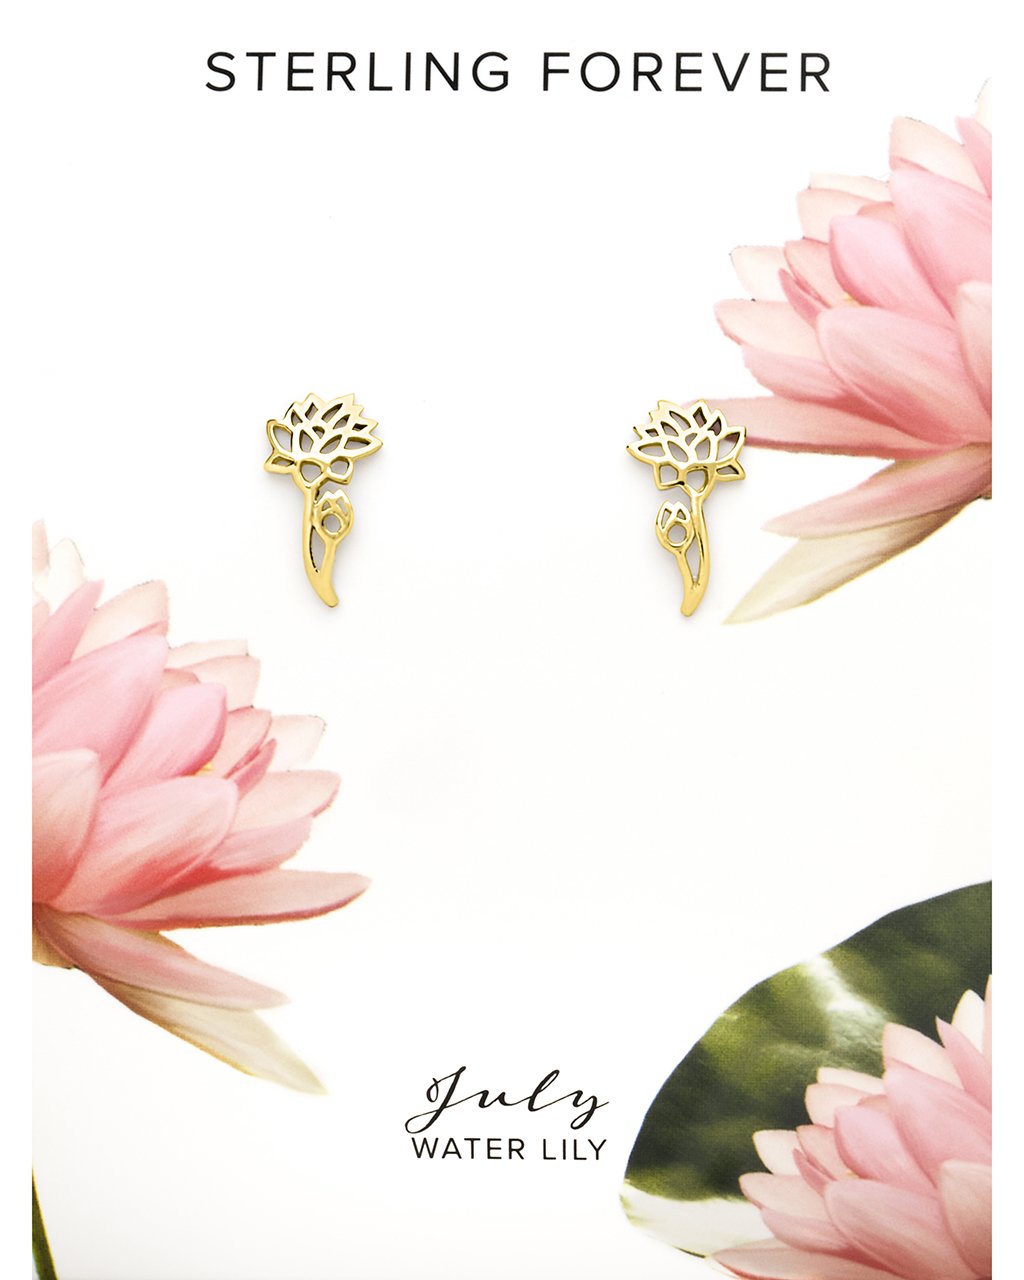 Sterling Silver Birth Flower Studs Earring Sterling Forever Gold July / Water Lily 